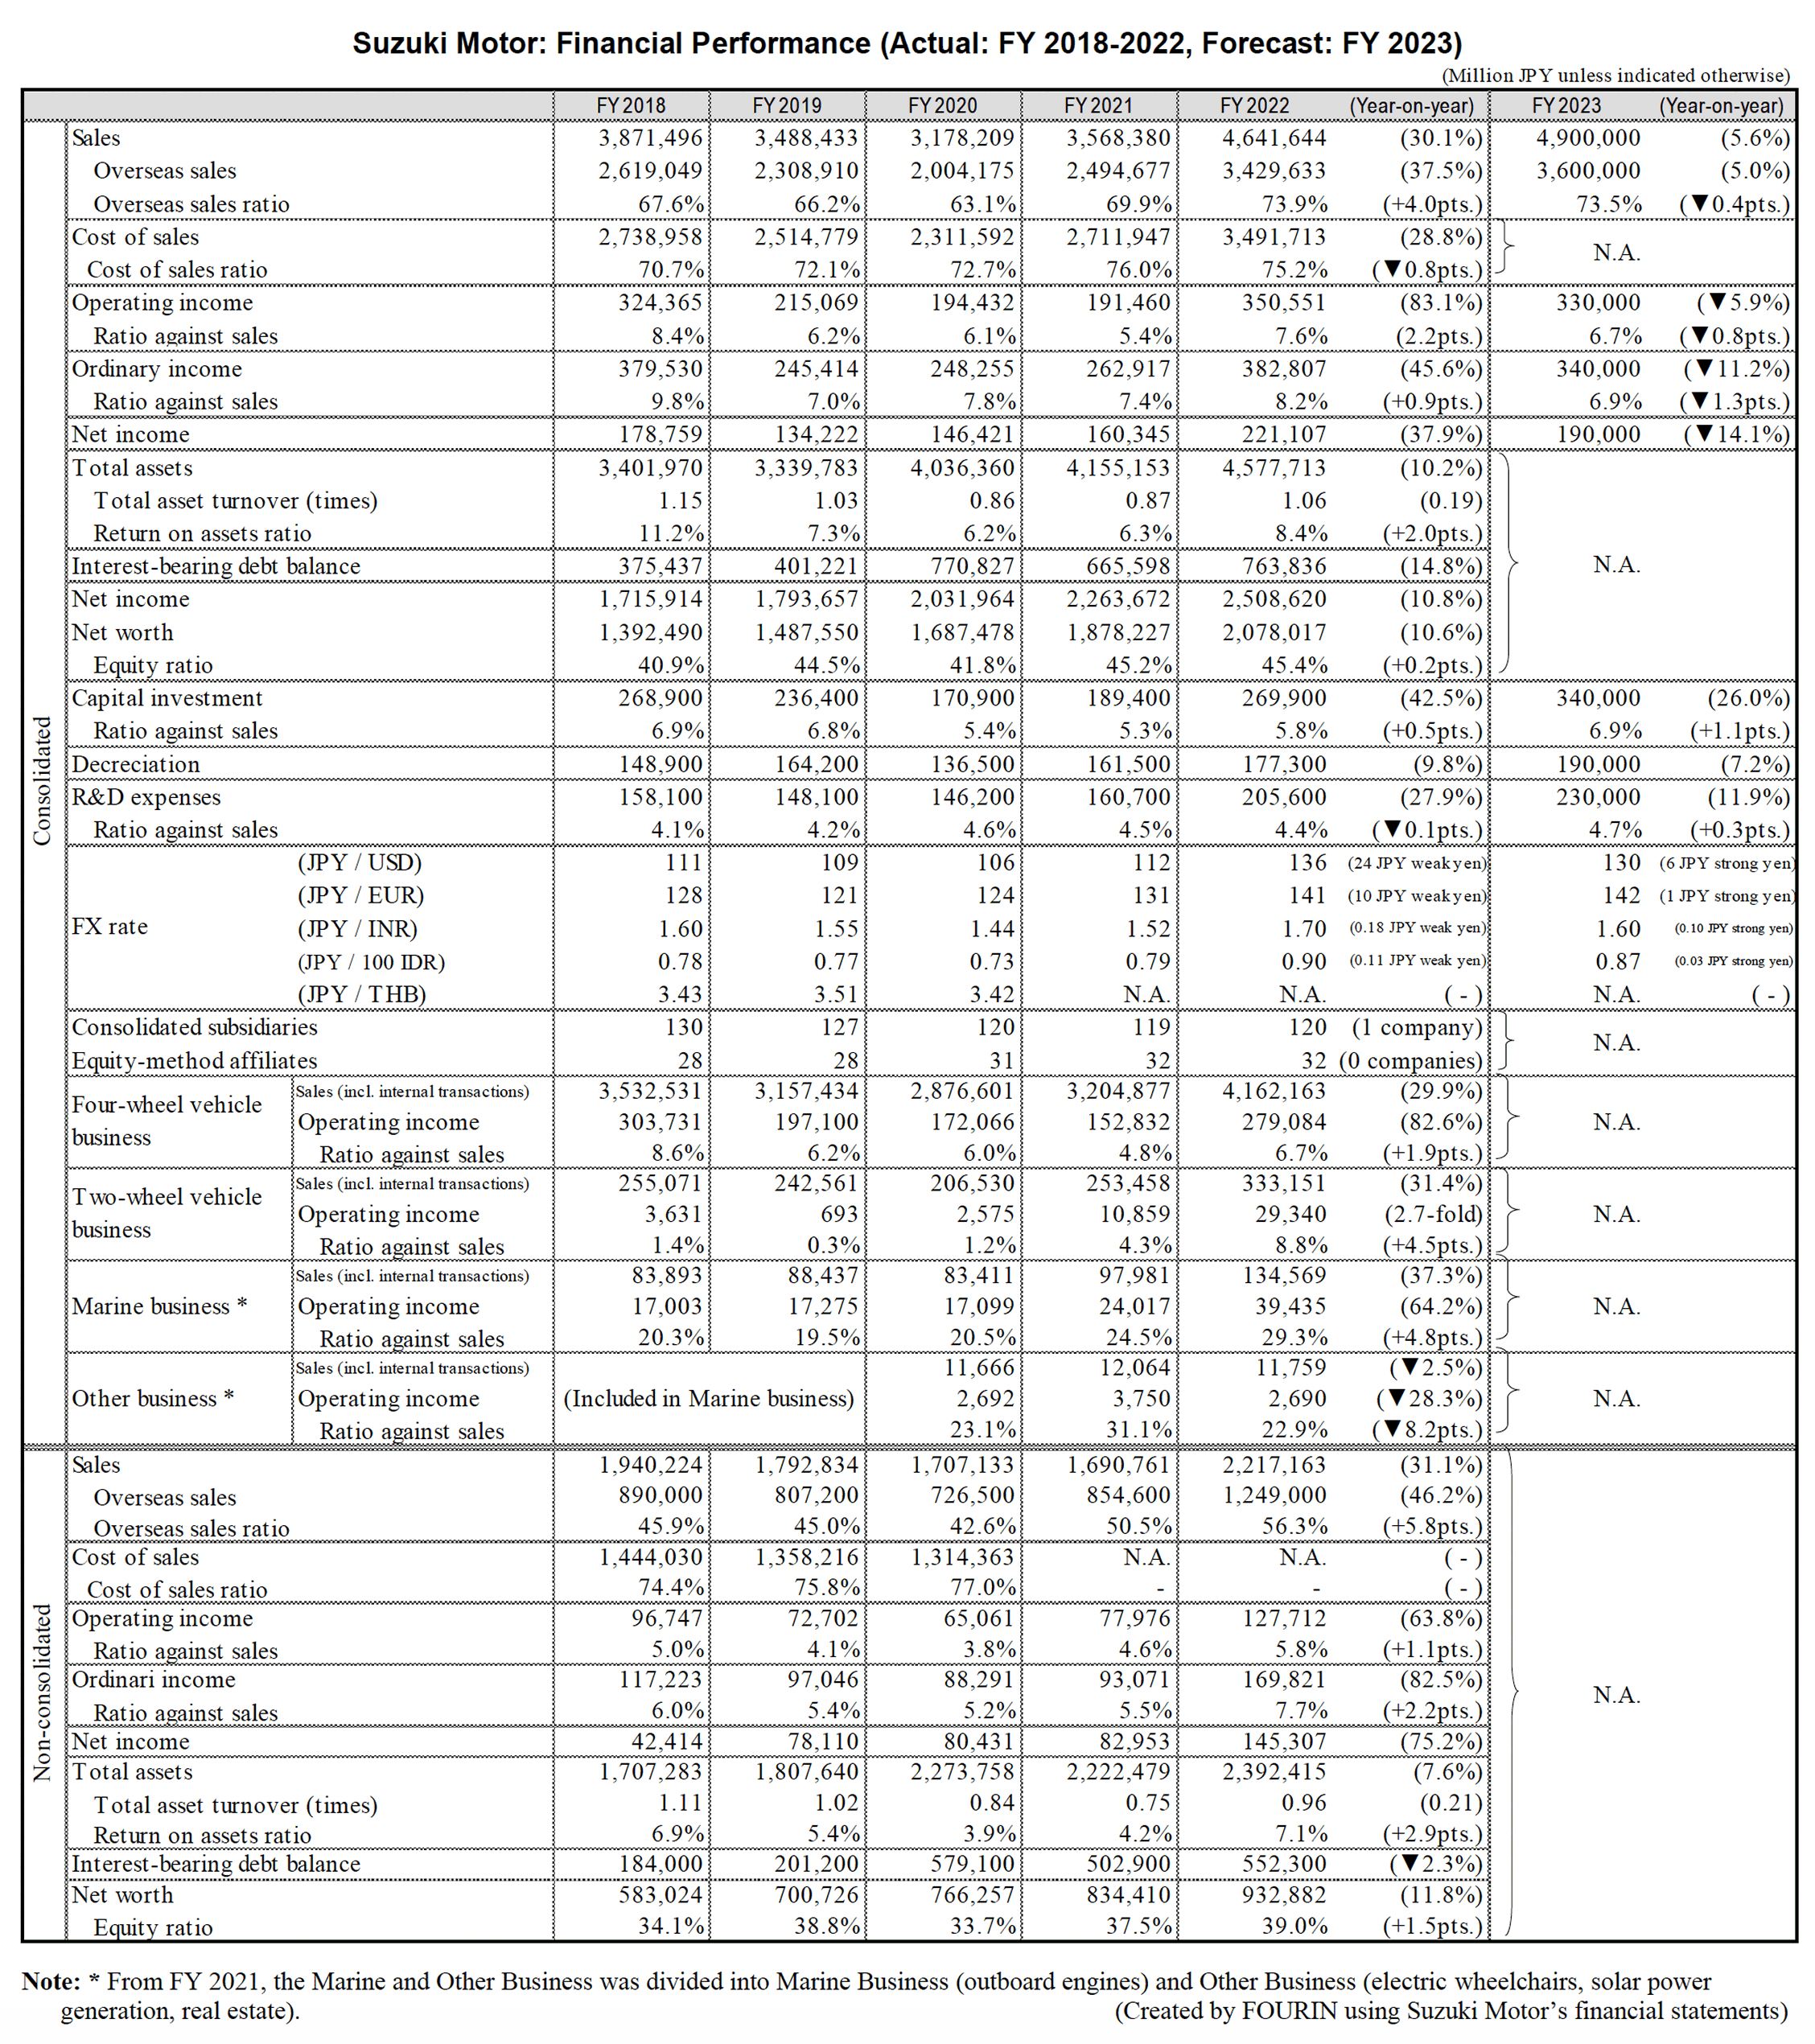 Table data: Suzuki Motor: Financial Performance (Actual: FY 2018-2022, Forecast: FY 2023)